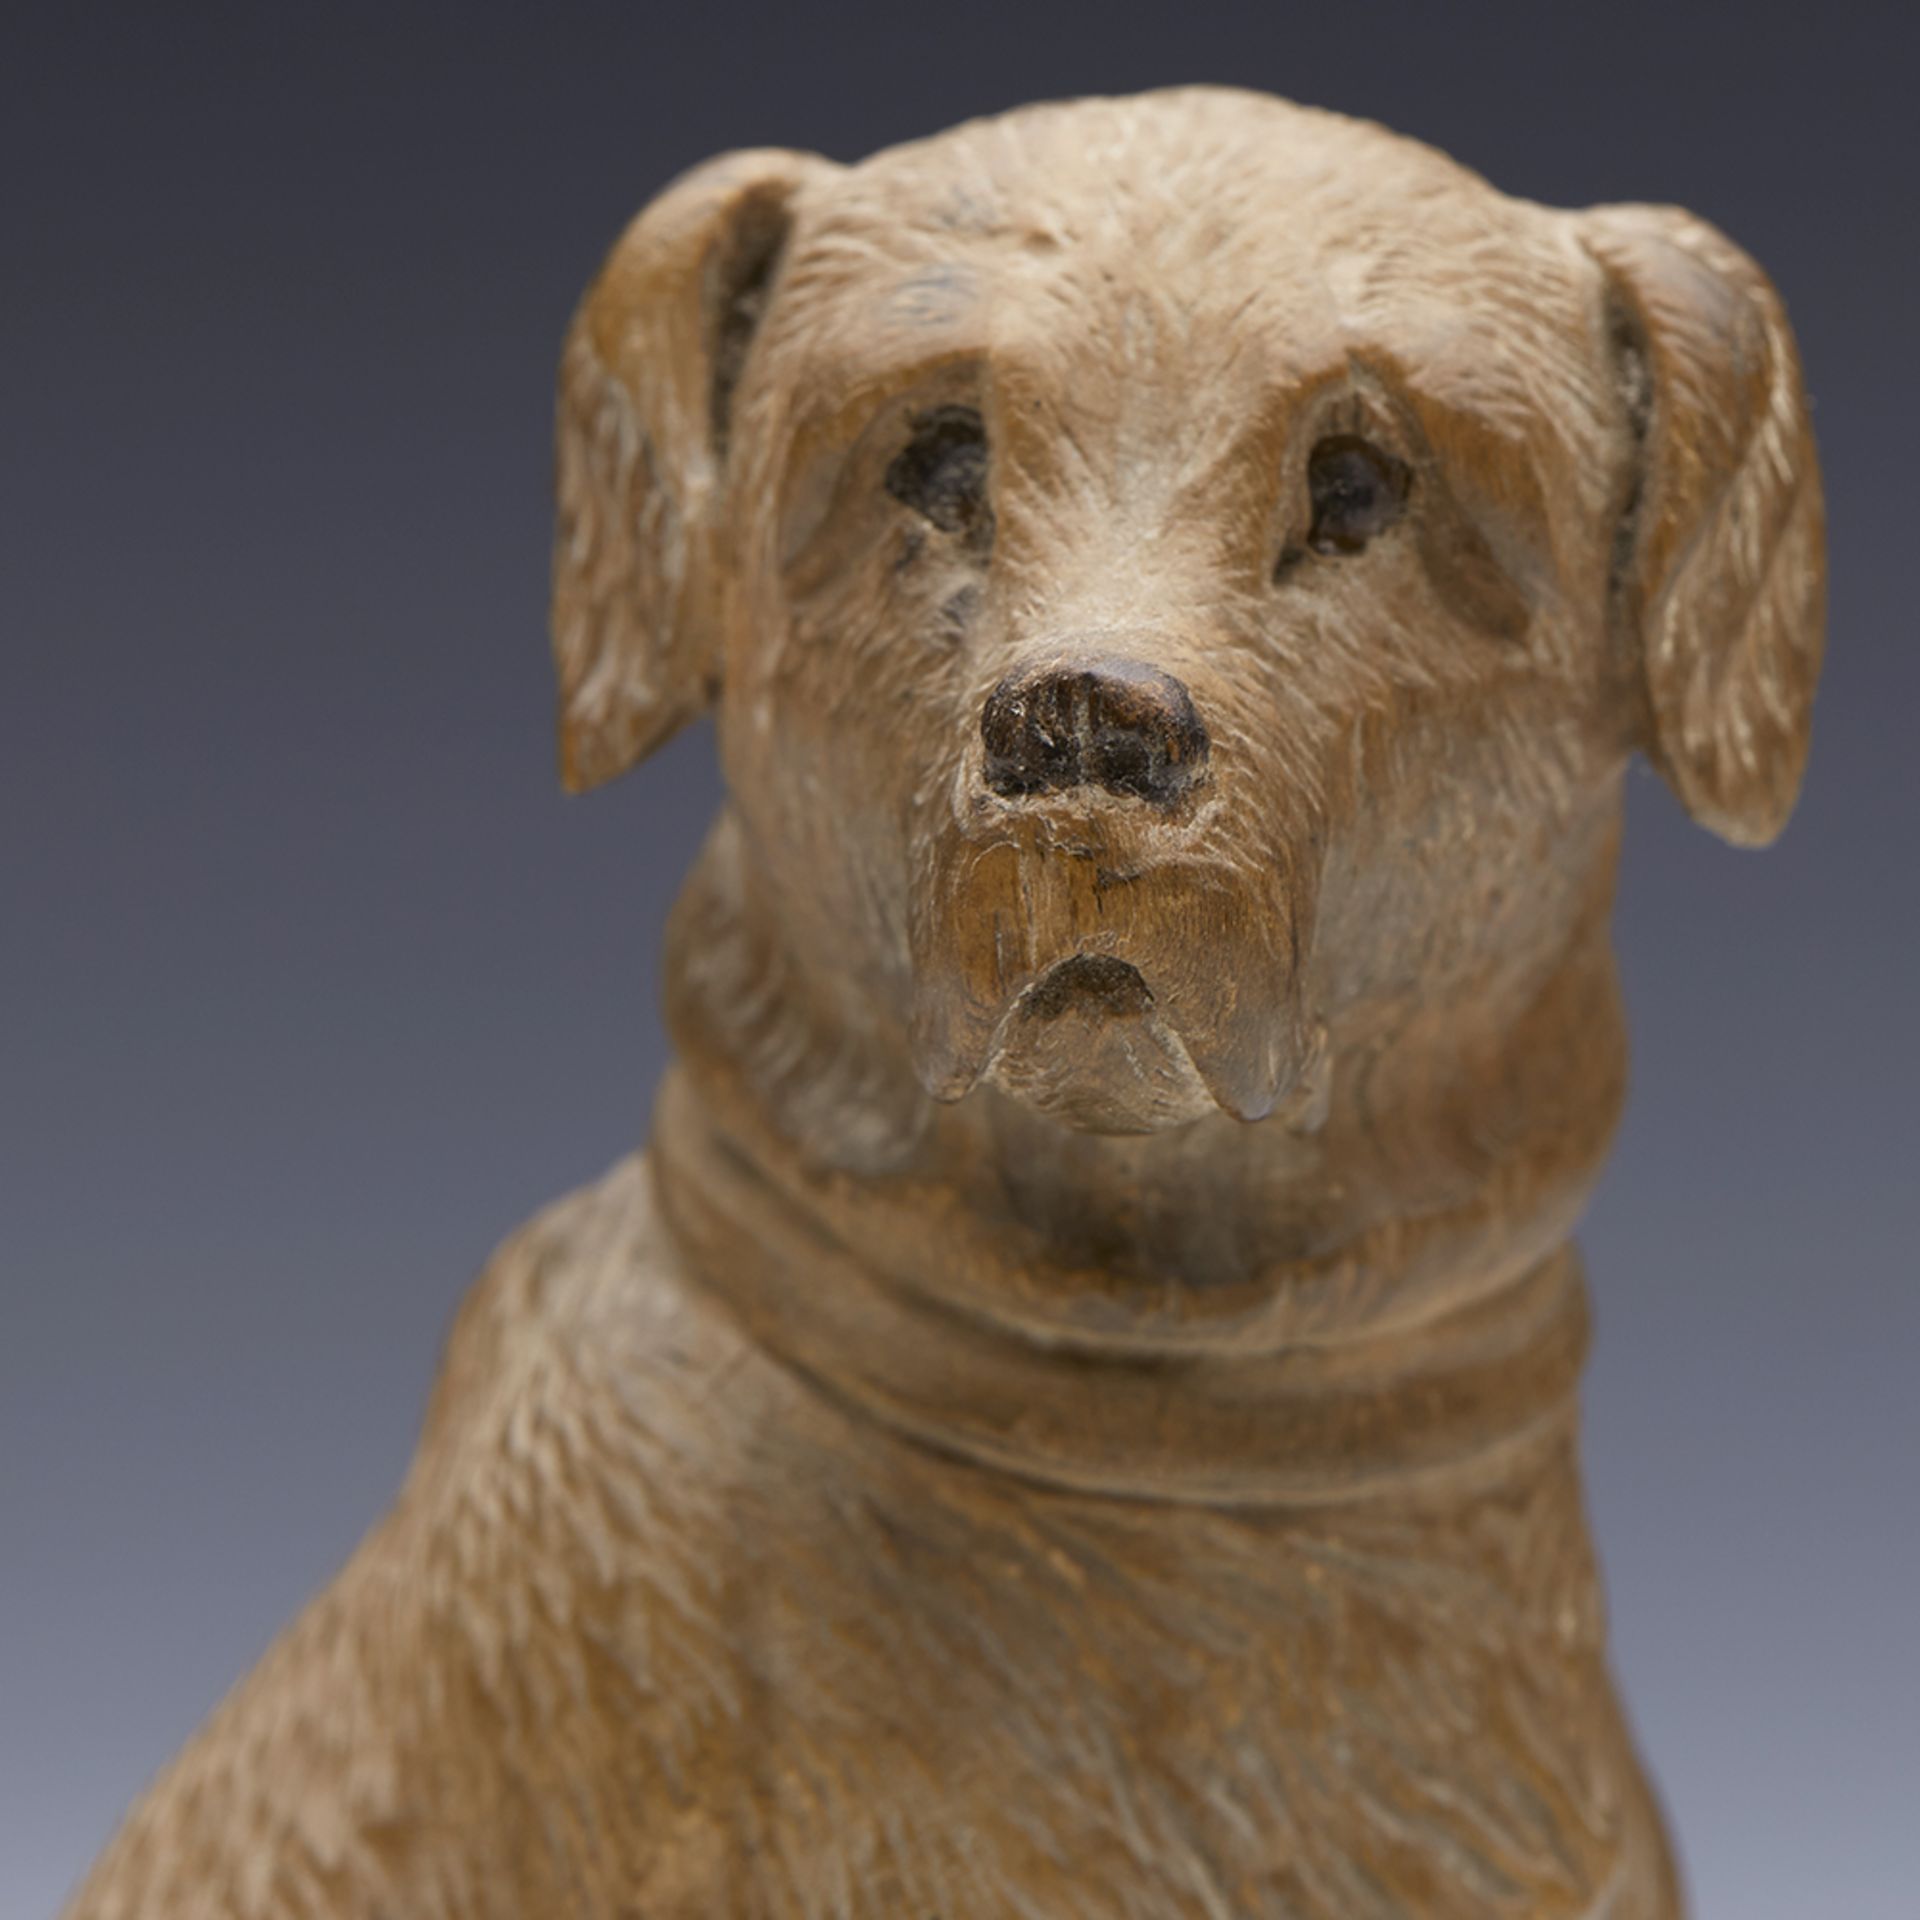 ANTIQUE CARVED BLACKFOREST FIGURE OF A SEATED DOG 19TH C.   DIMENSIONS   Height 10,5cm, Length 7cm - Image 7 of 14